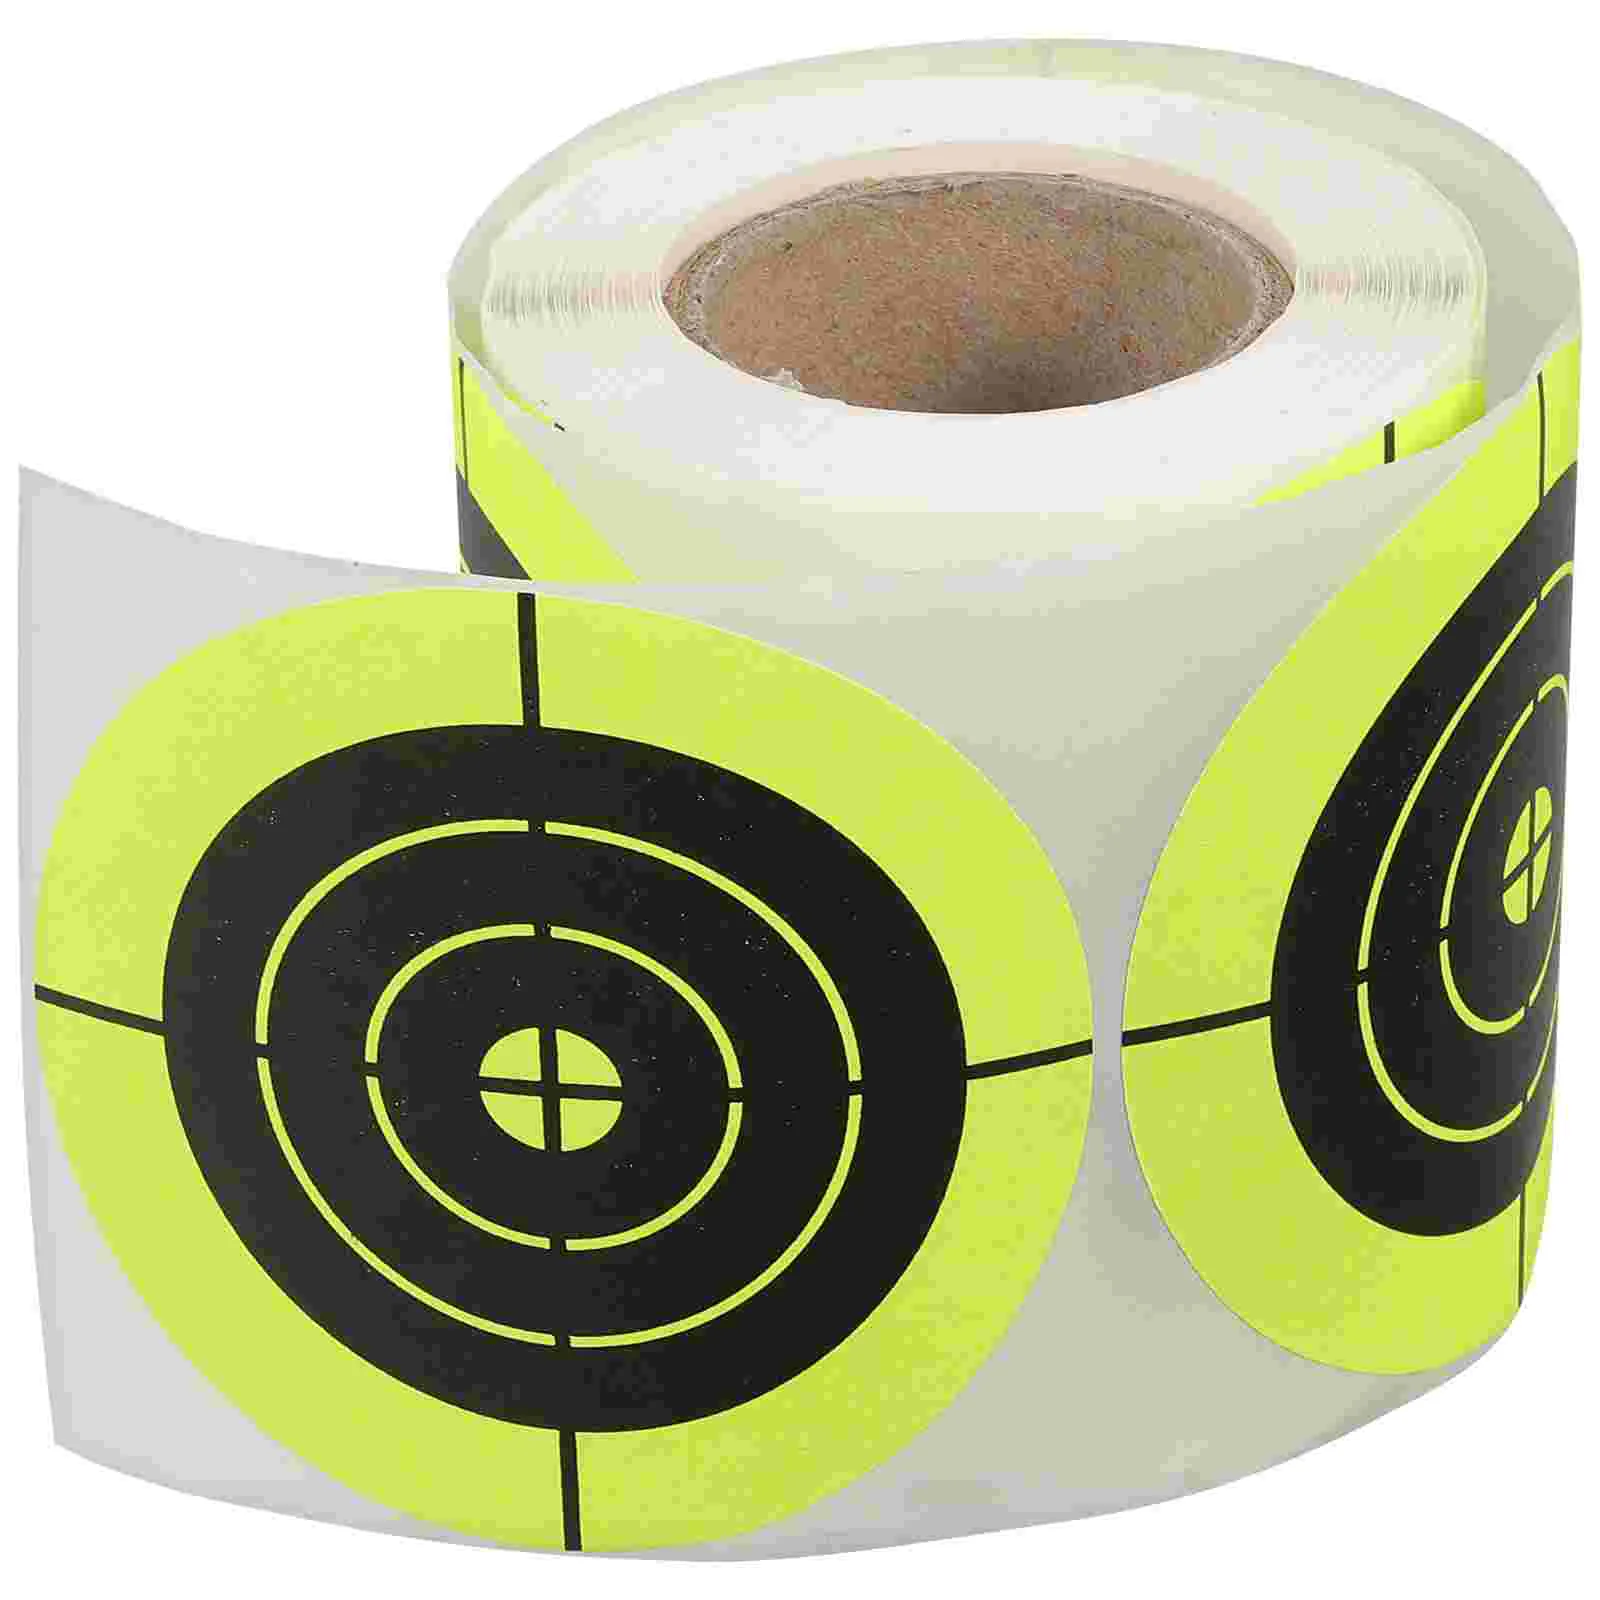 

Sports Stickers Target Paper Creative Spot Accessories Shooting Targets Fluorescent Practice